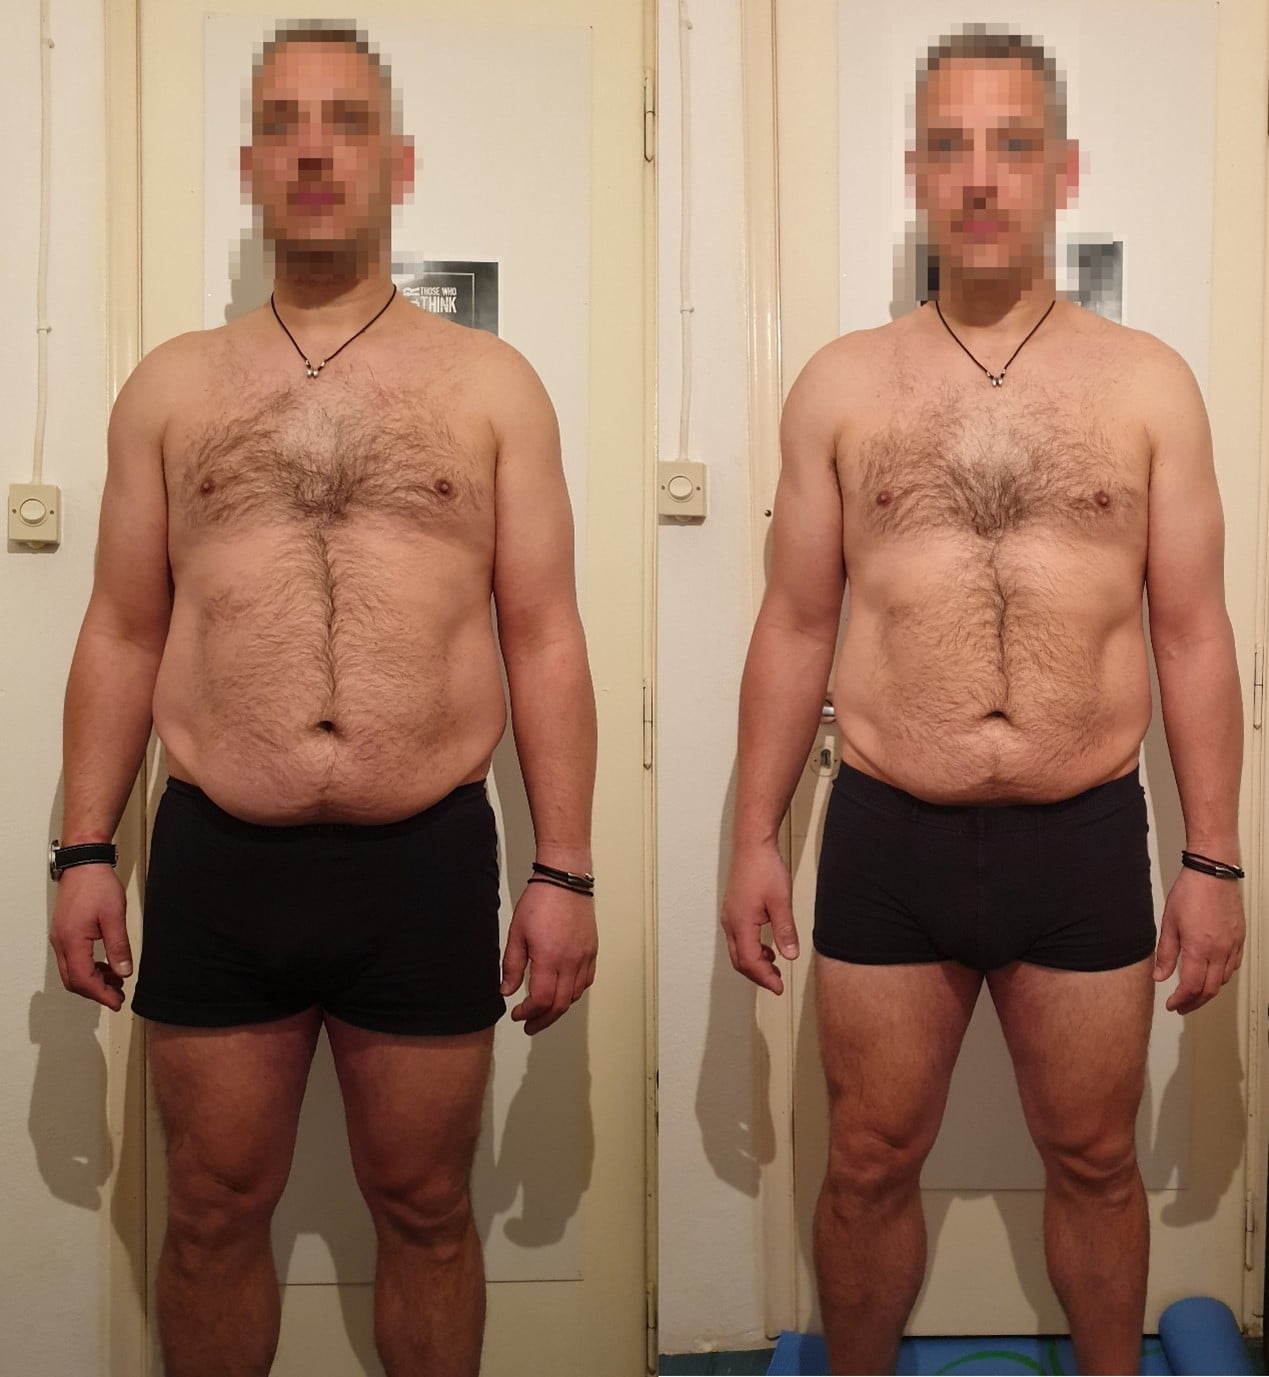 From 108kg to 89kg_The Amazing Weight Loss Story of Nikos Without Exercise